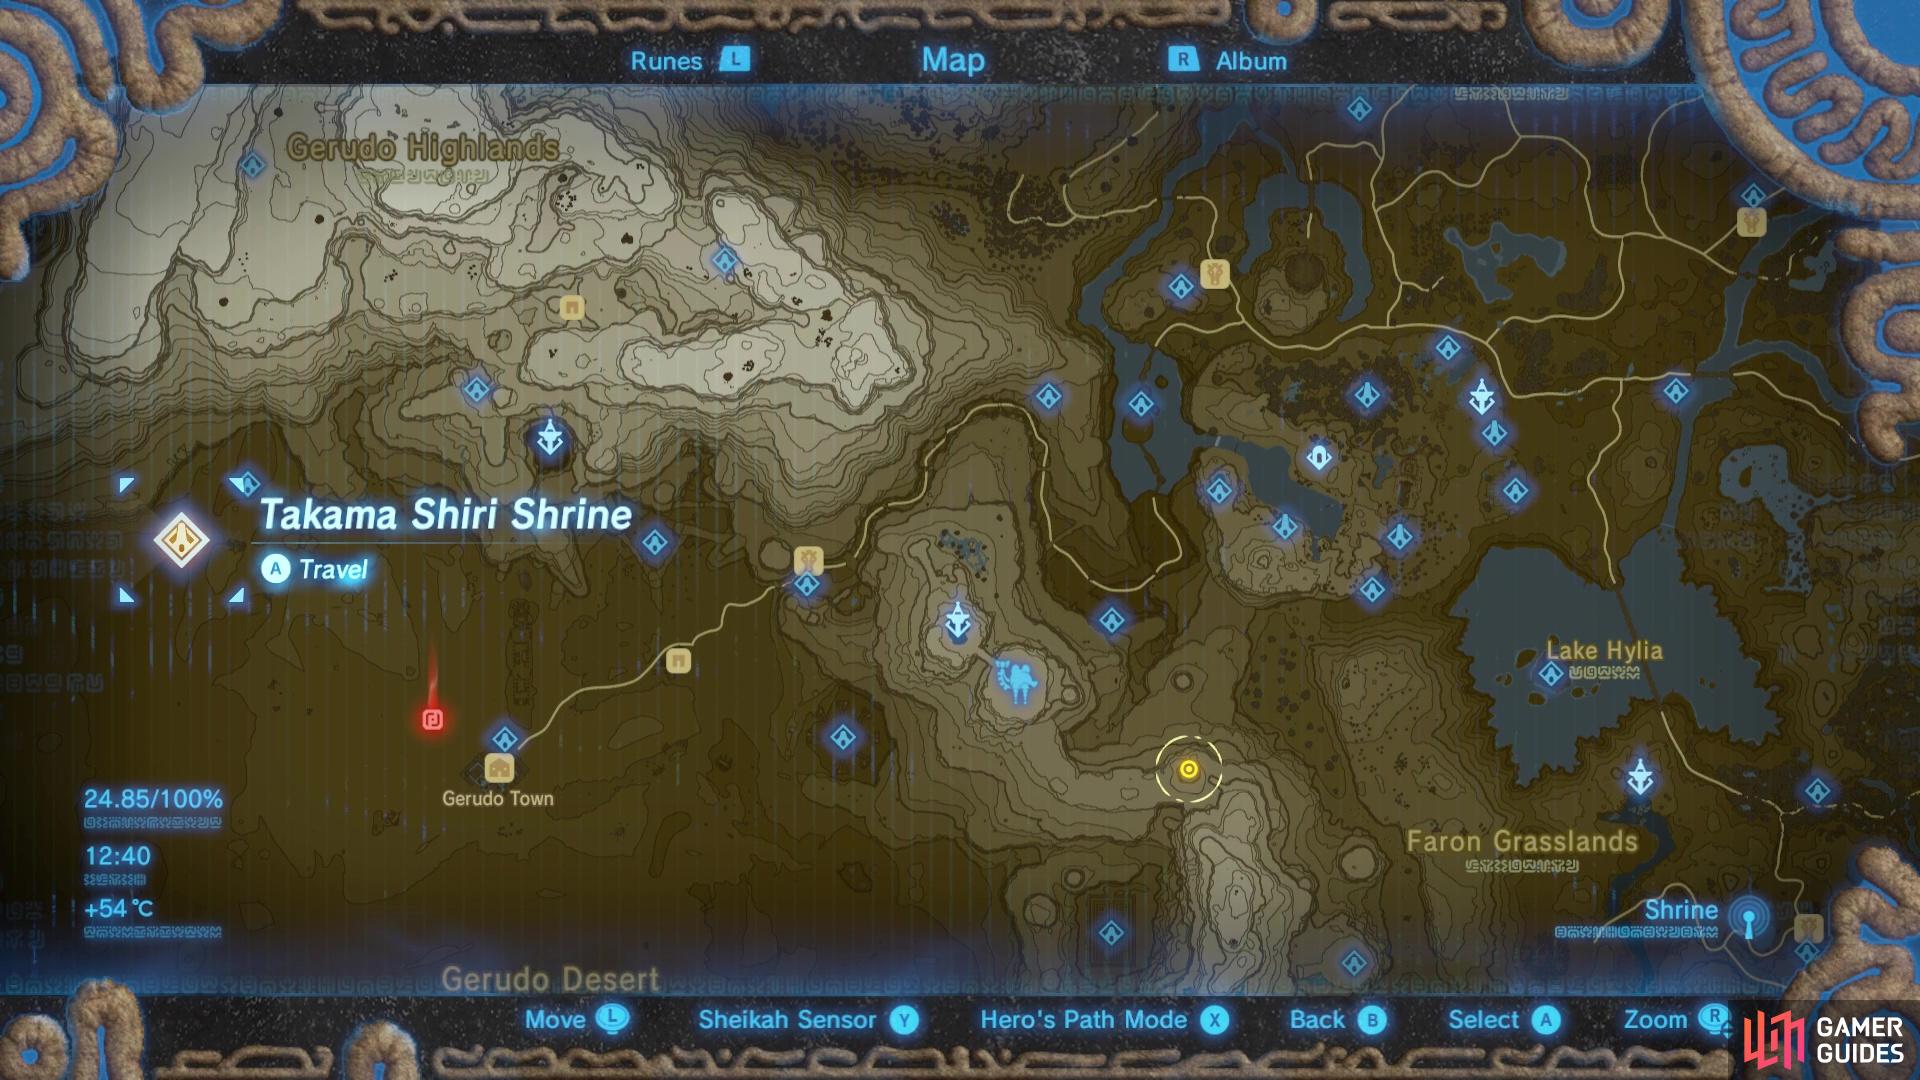 Once you’ve completed the trial, you’ll find Takama Shiri Shrine northwest of Gerudo Town. The red marker is indicative of where the first ring is found.